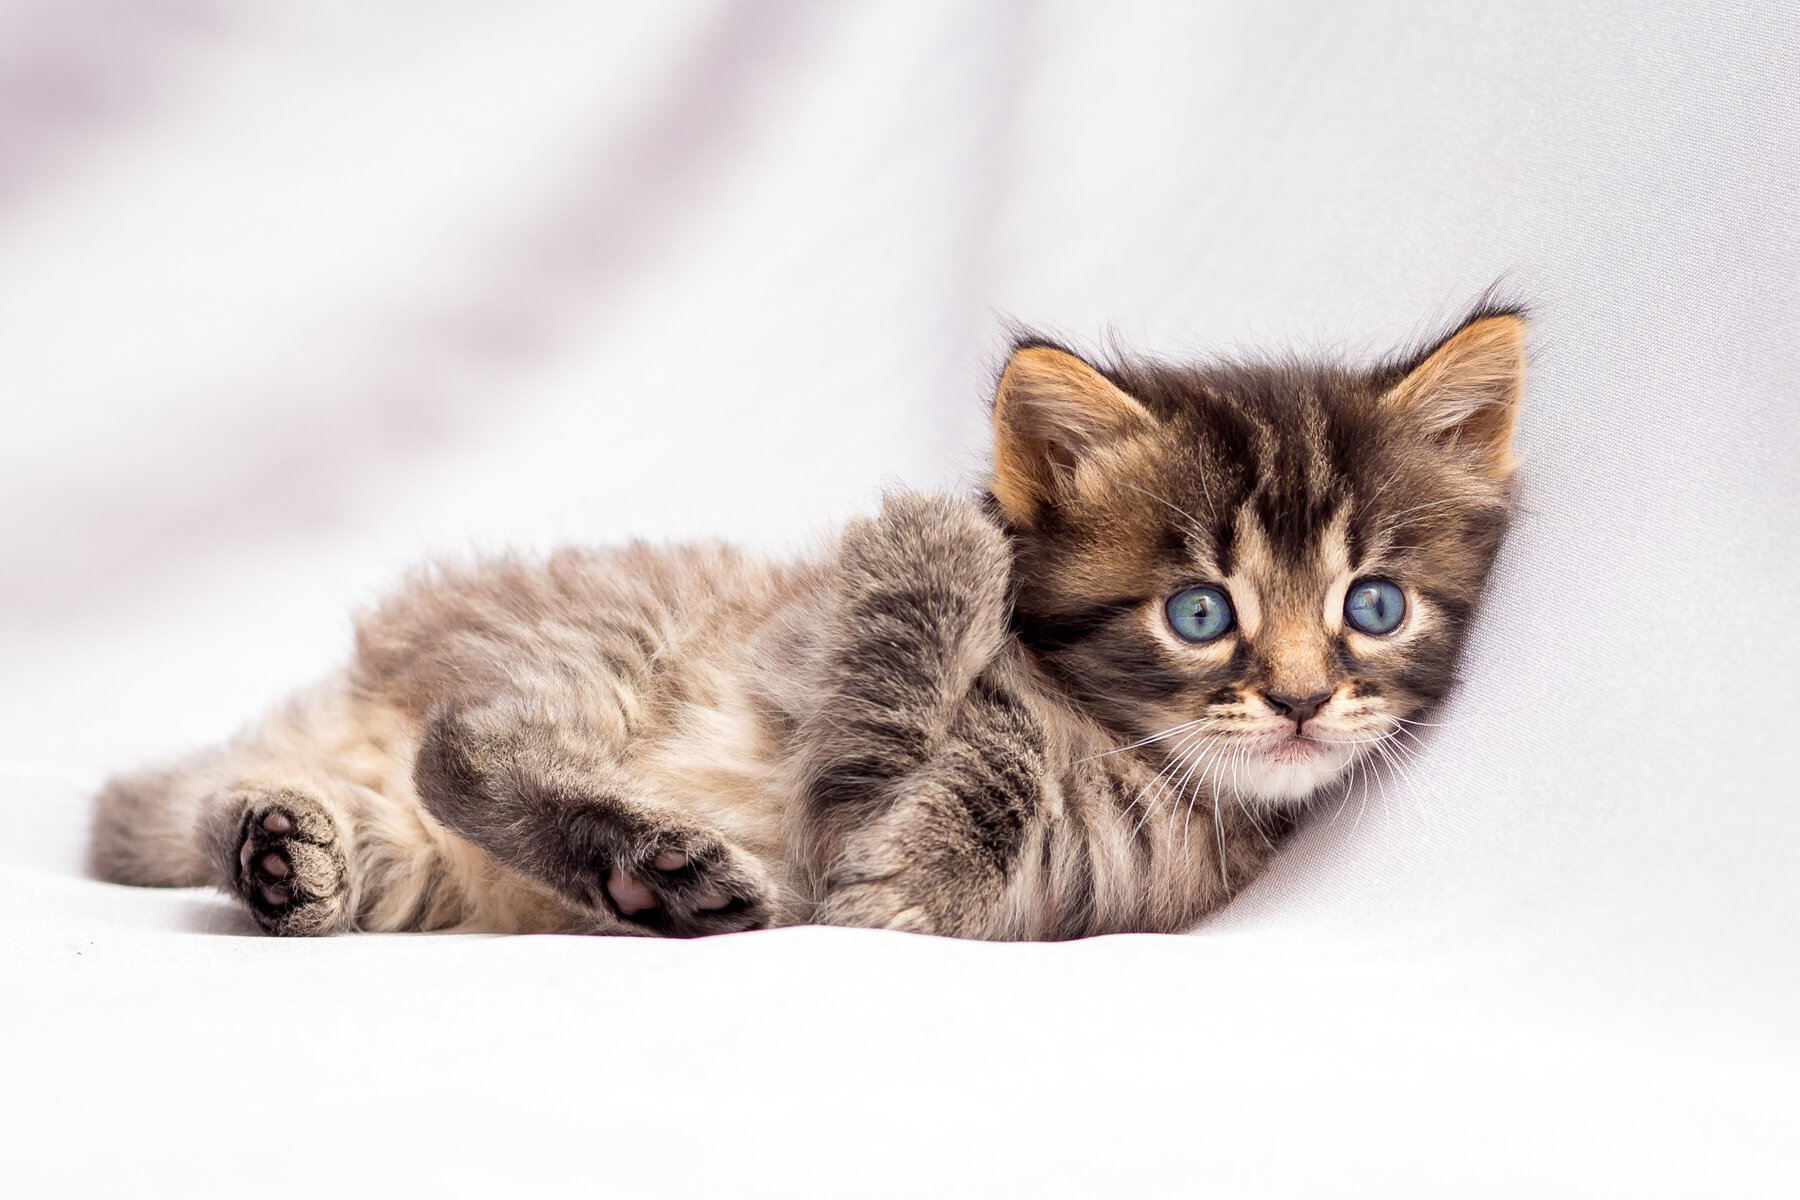 studio image grey tabby kitten white background, used to introduce "best boy cat names"